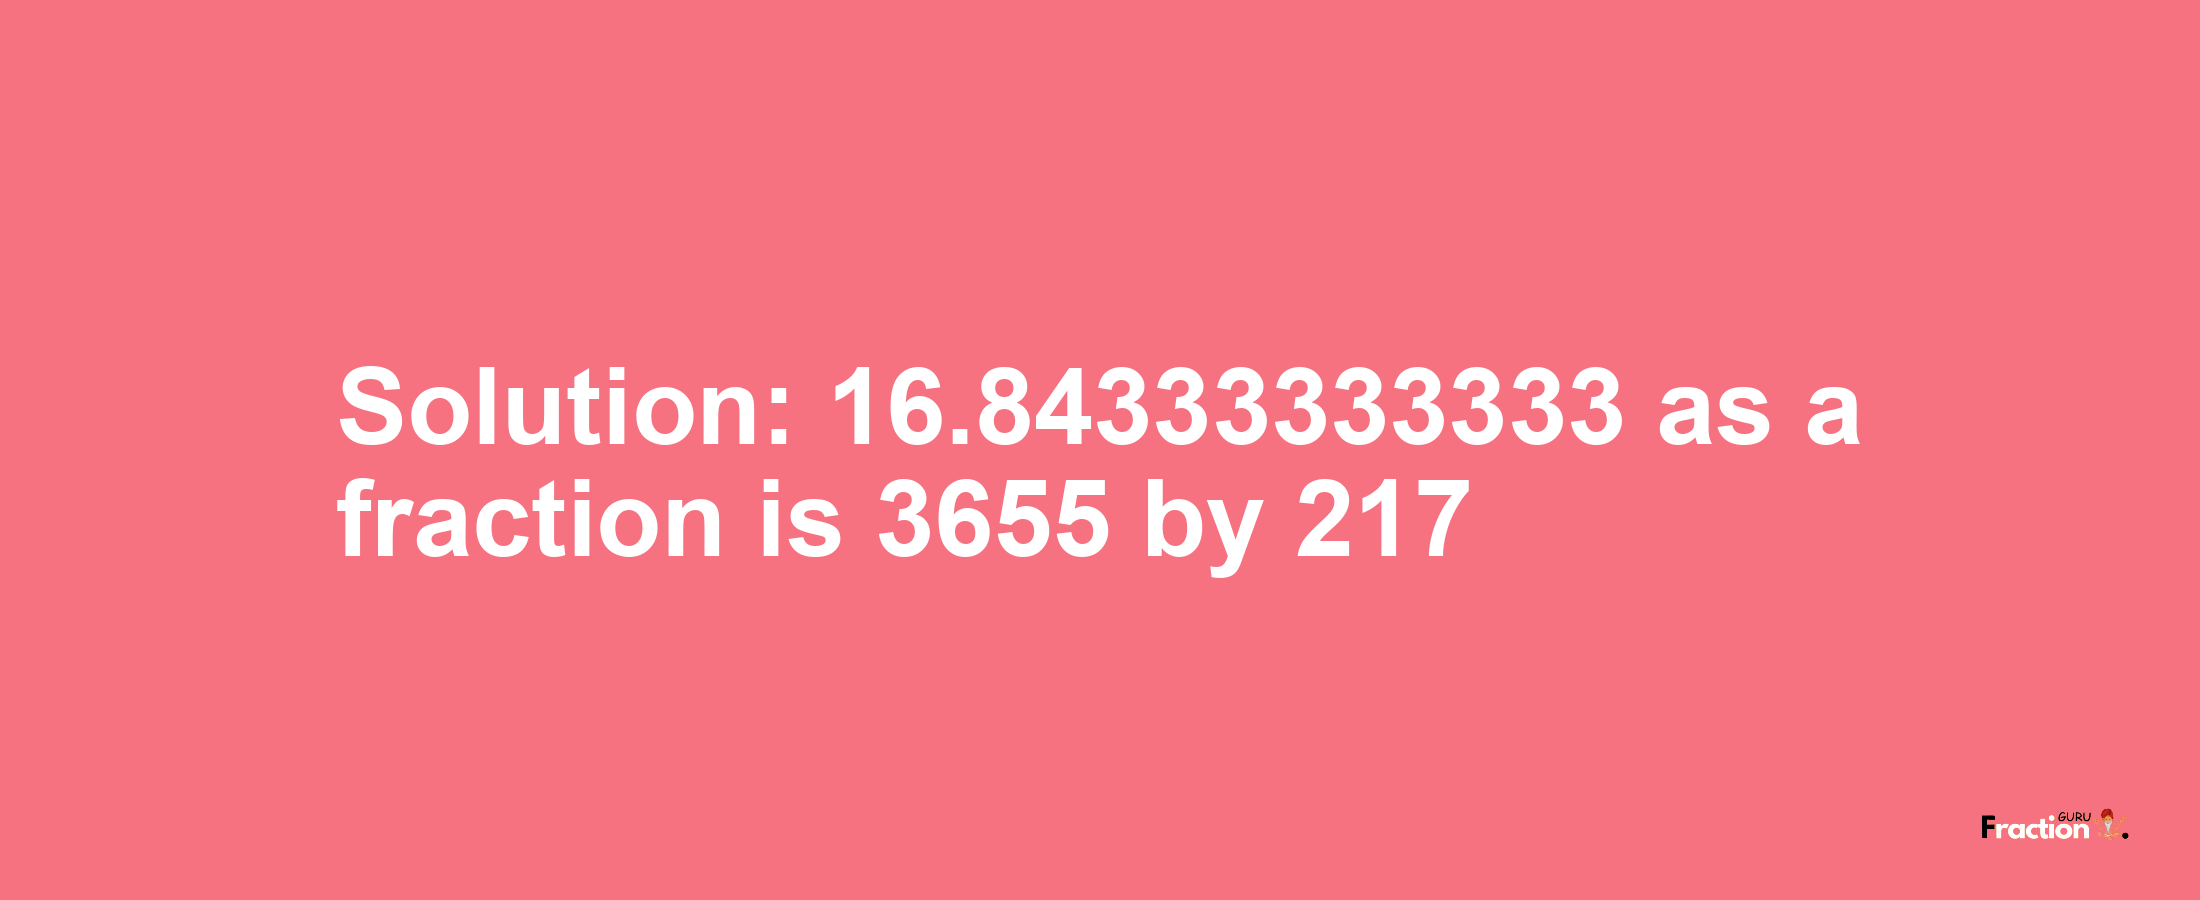 Solution:16.84333333333 as a fraction is 3655/217